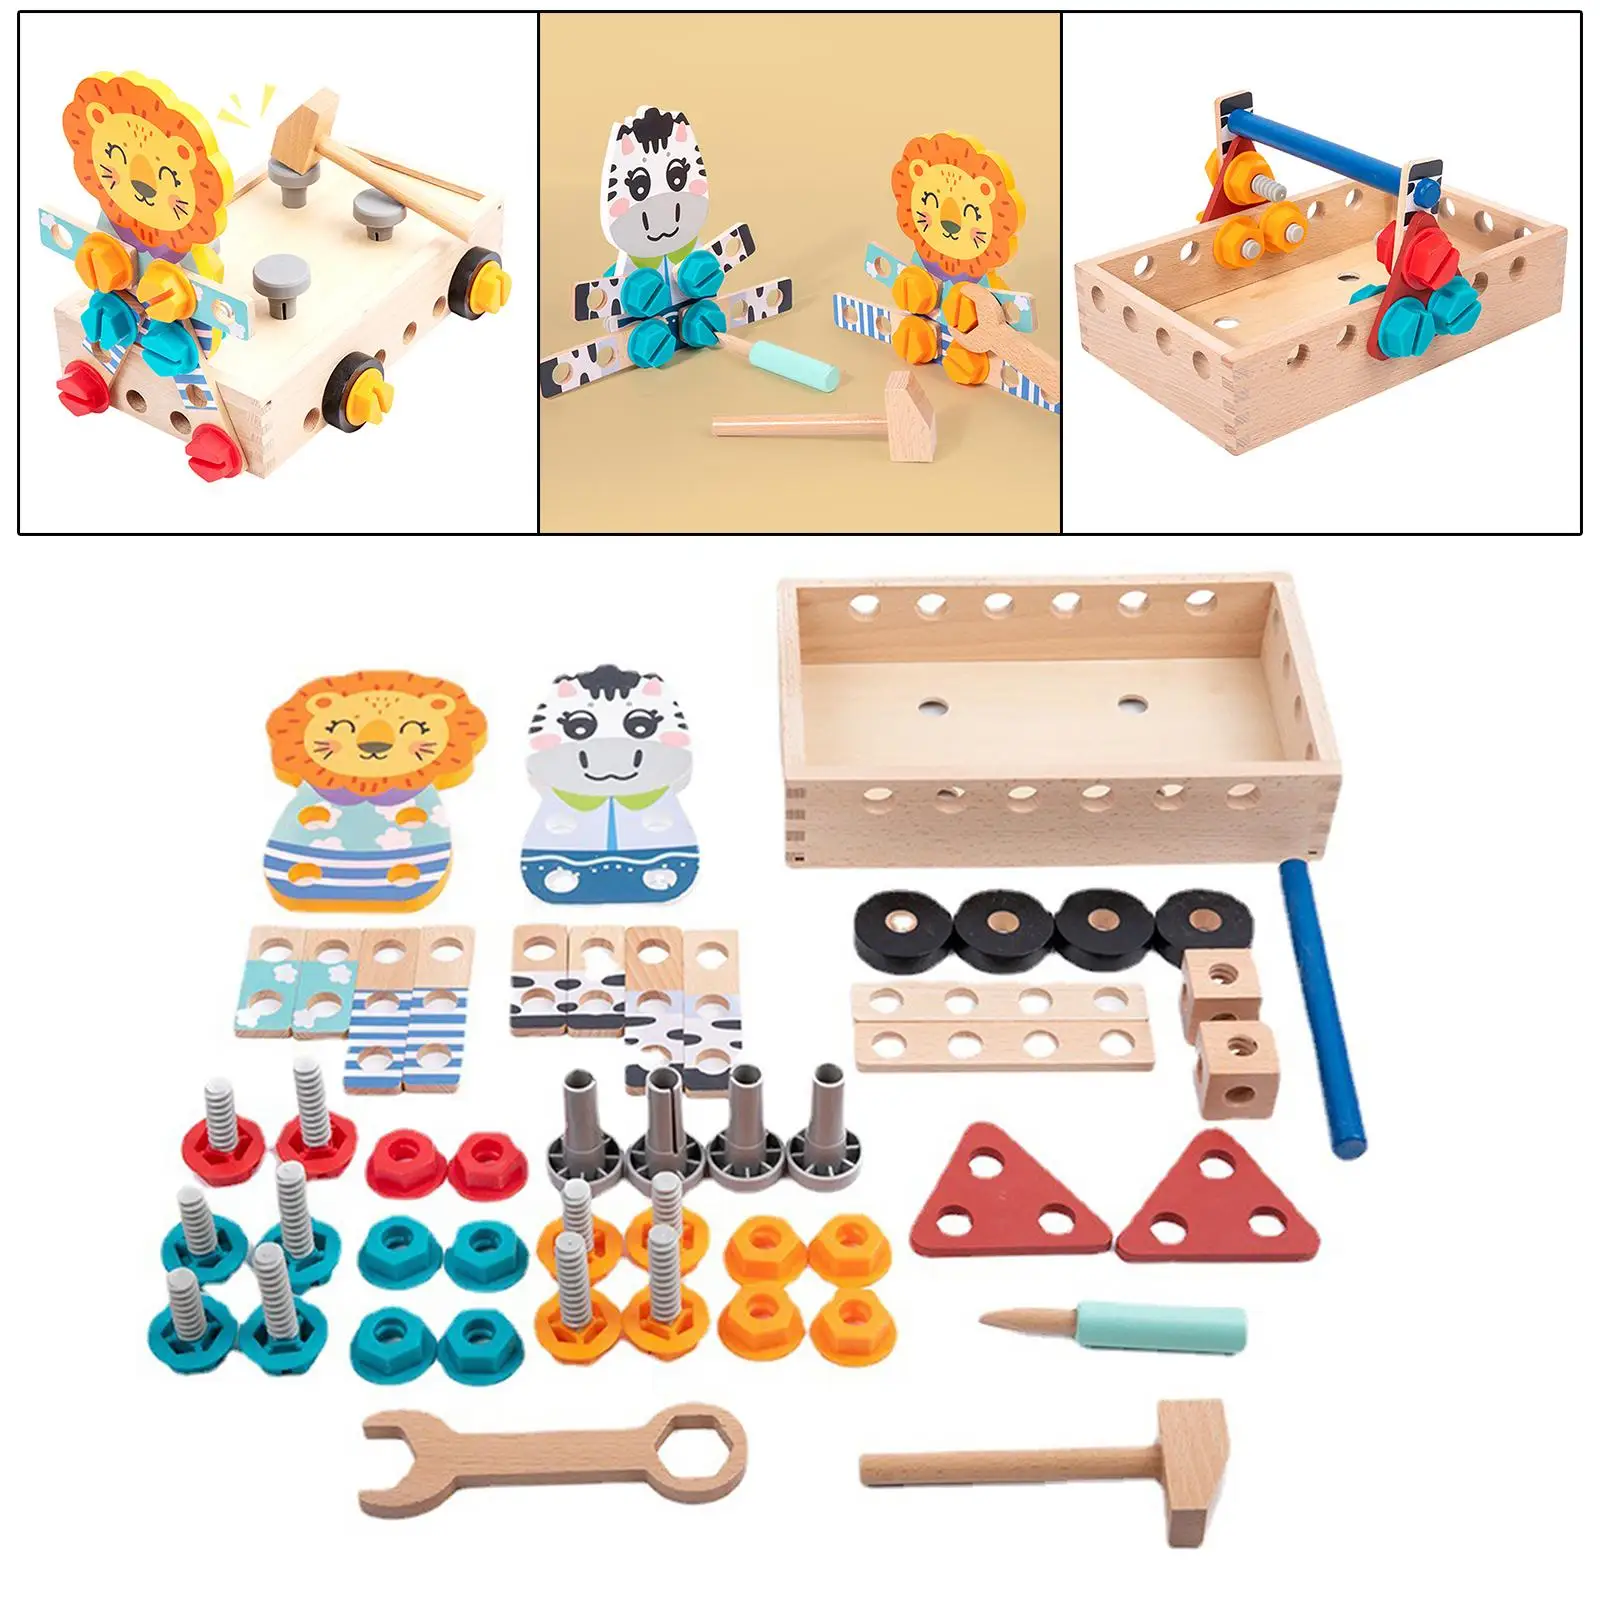 Kids Toolbox Set Creative Wooden Tool Set Pretend Game education Learning Activities Preschool Education Role Play